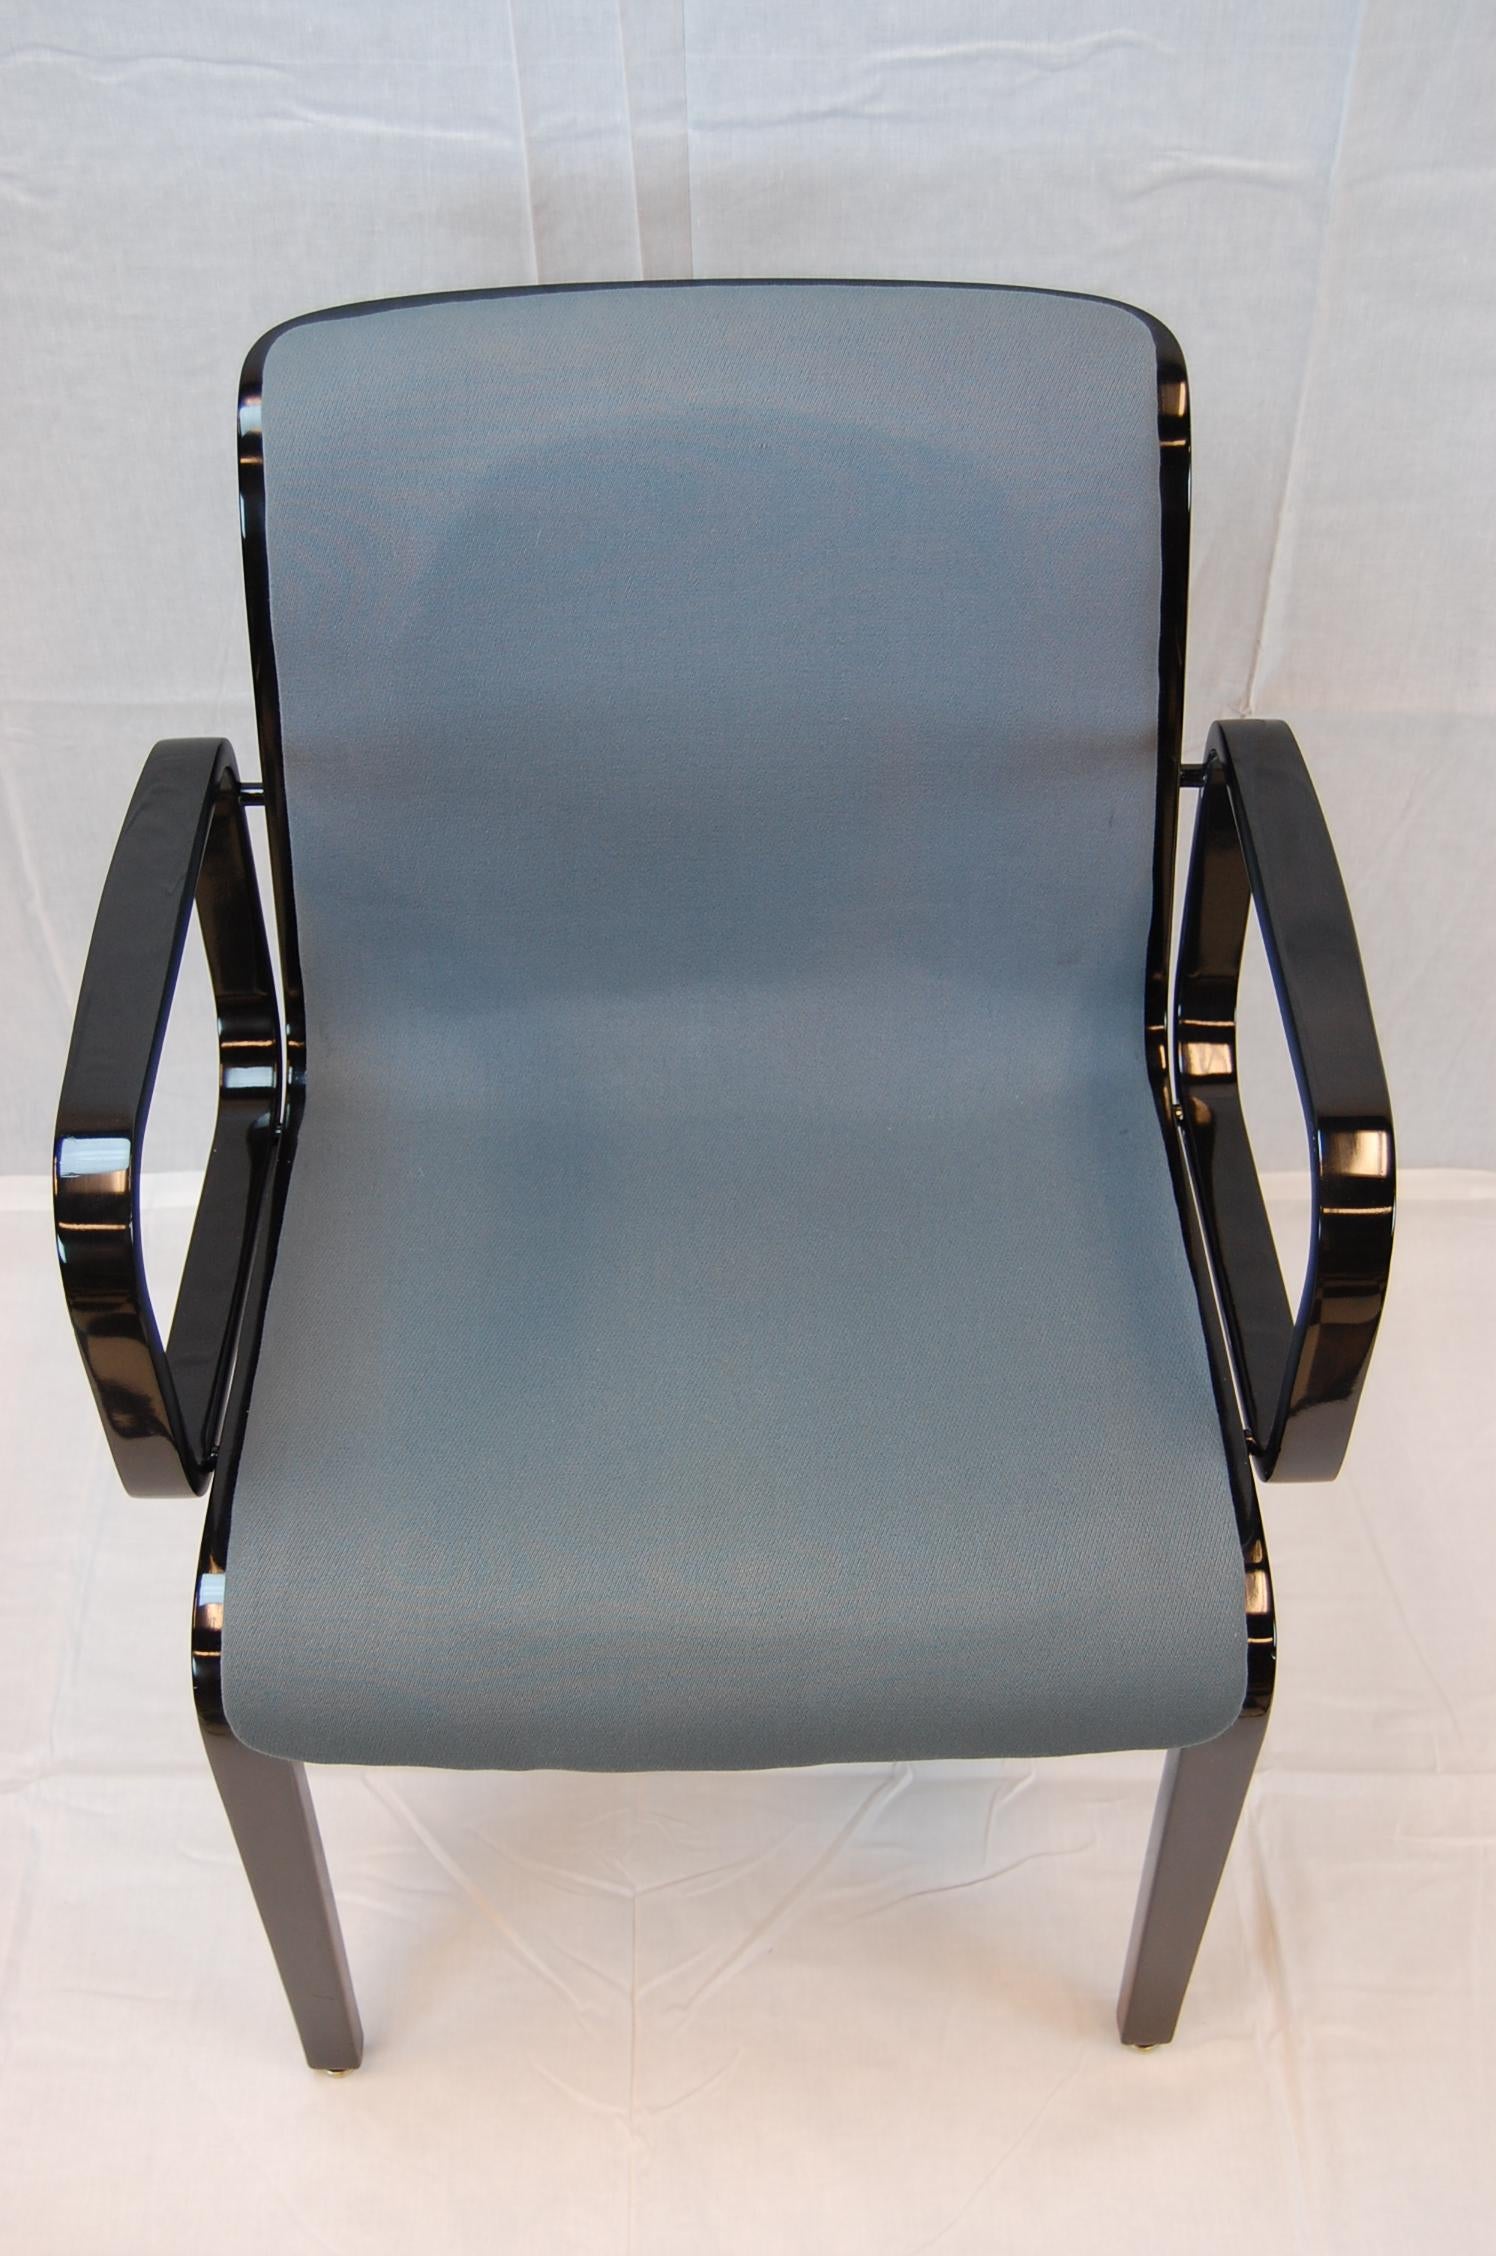 Late 20th Century Bill Stephens Black Lacquered Armchair for Knoll Furniture, Mid-1990s For Sale